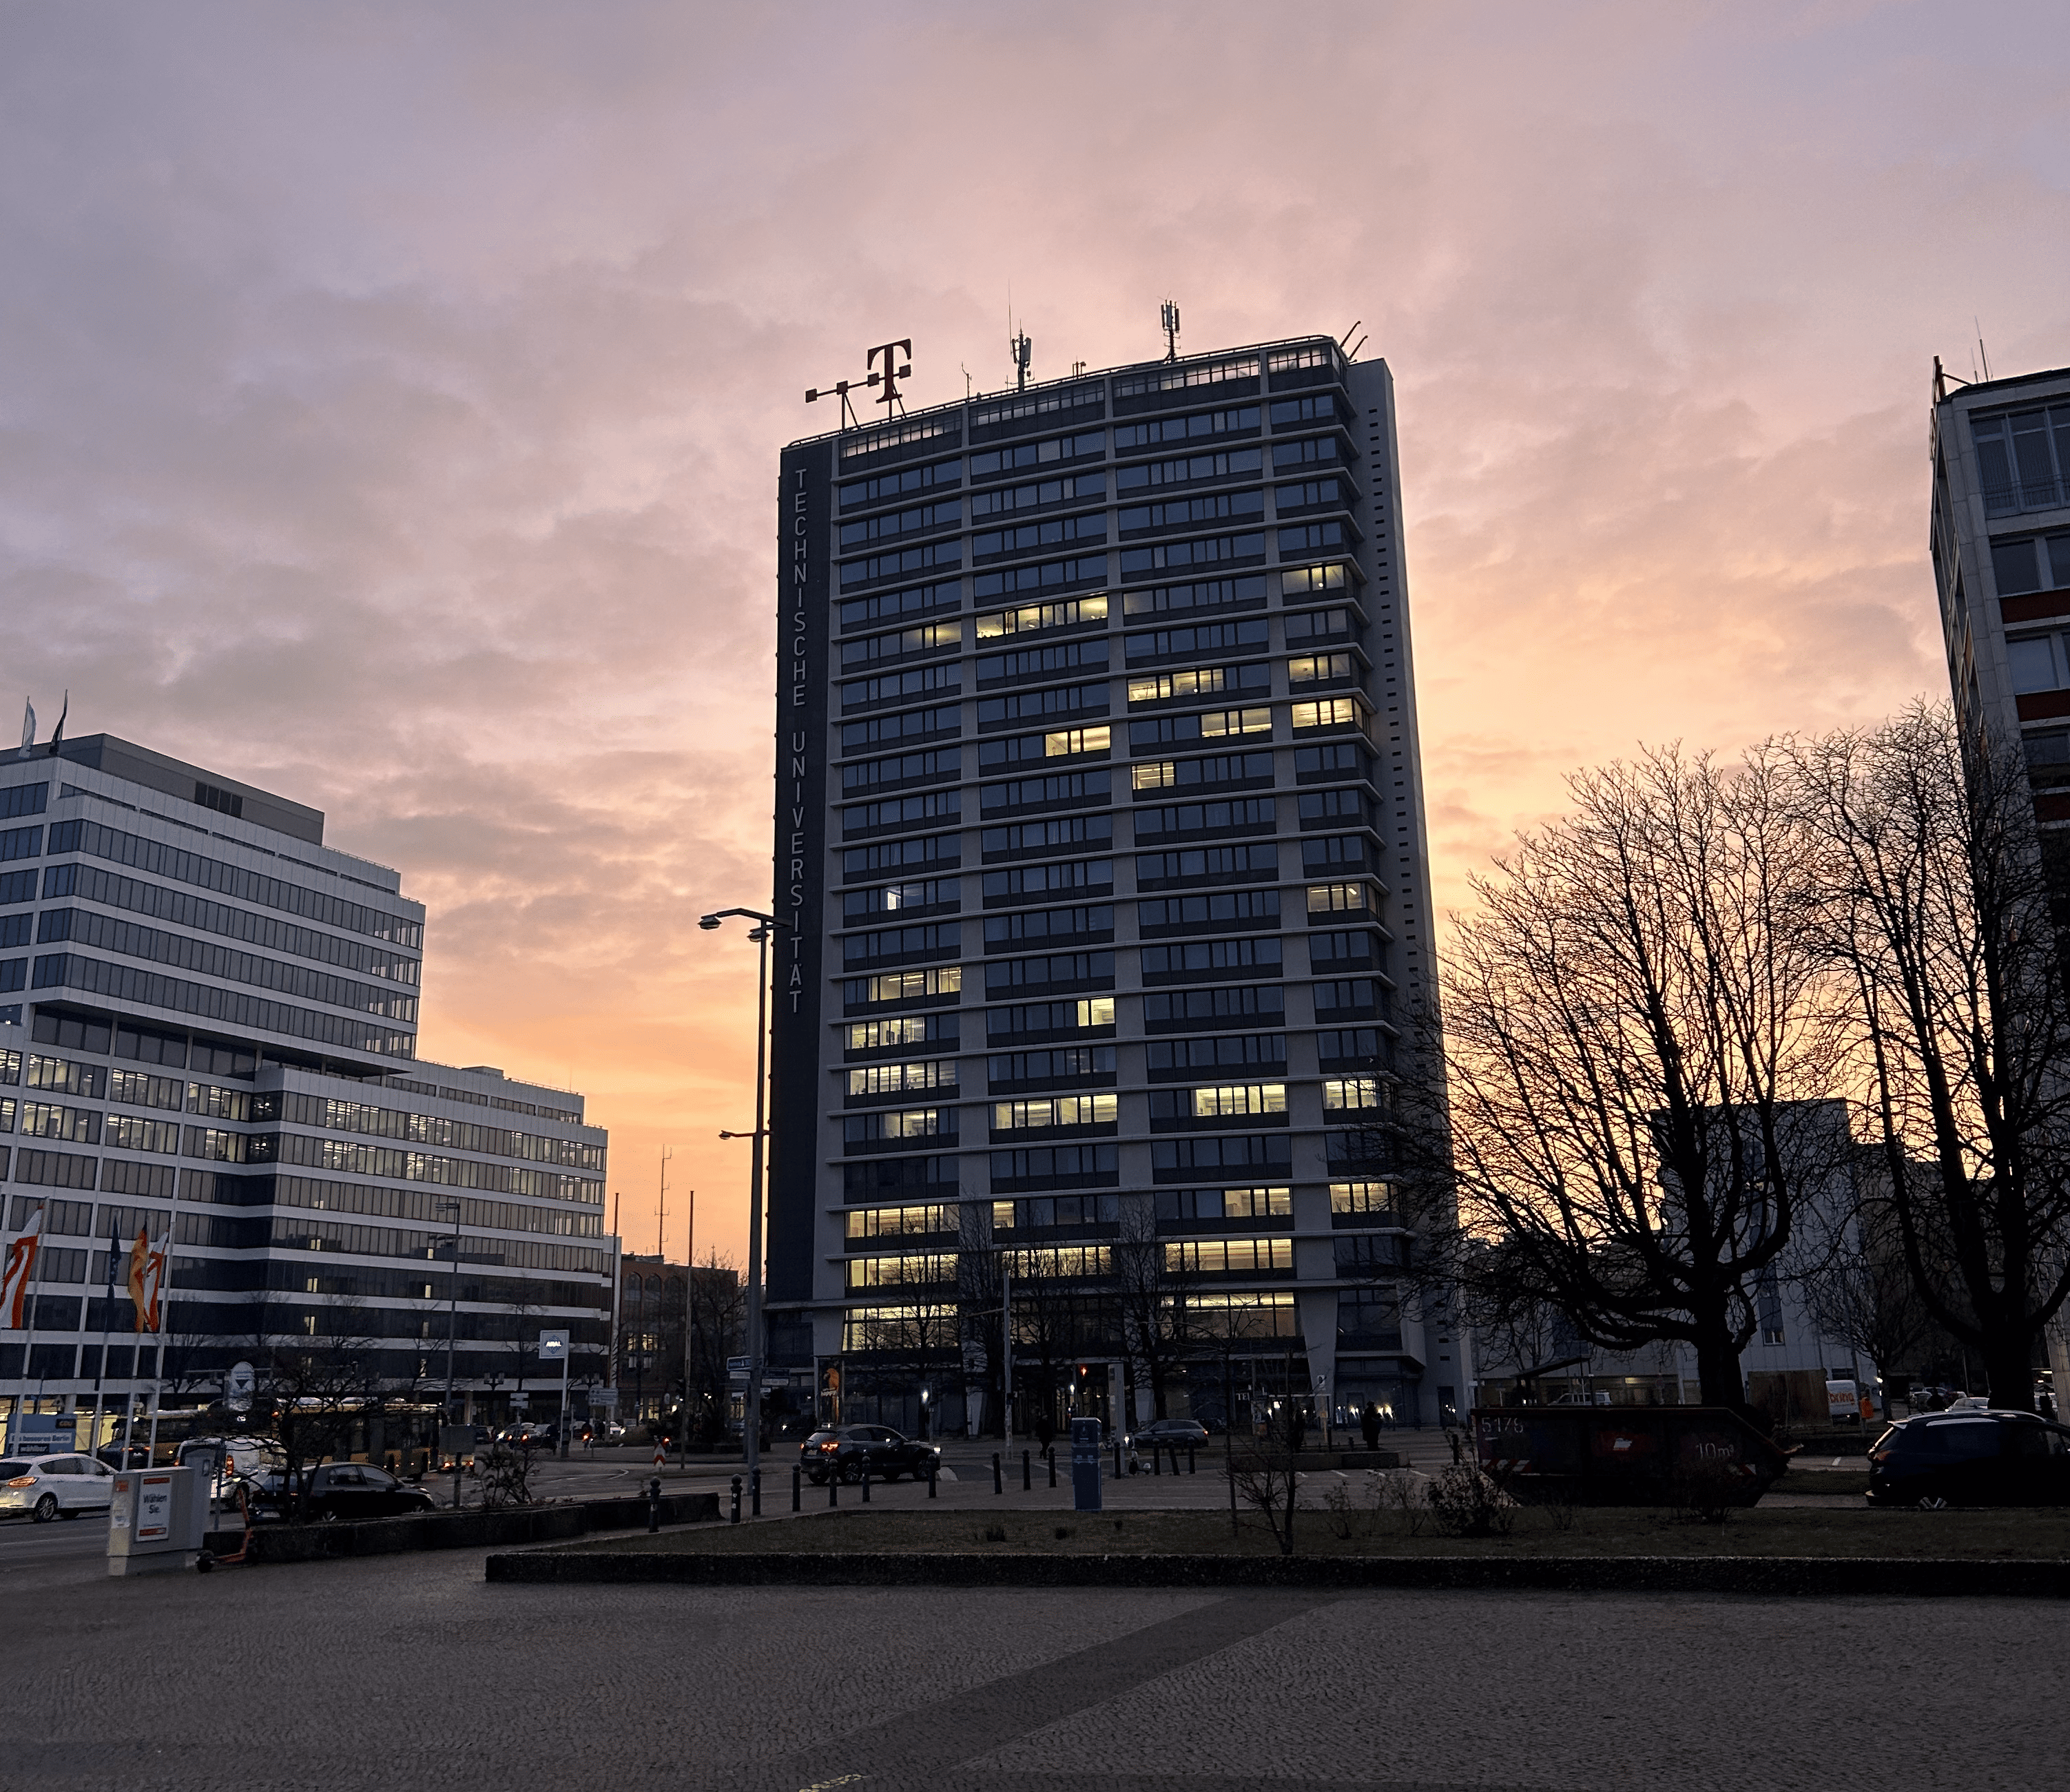 The Telekom building in the sunset